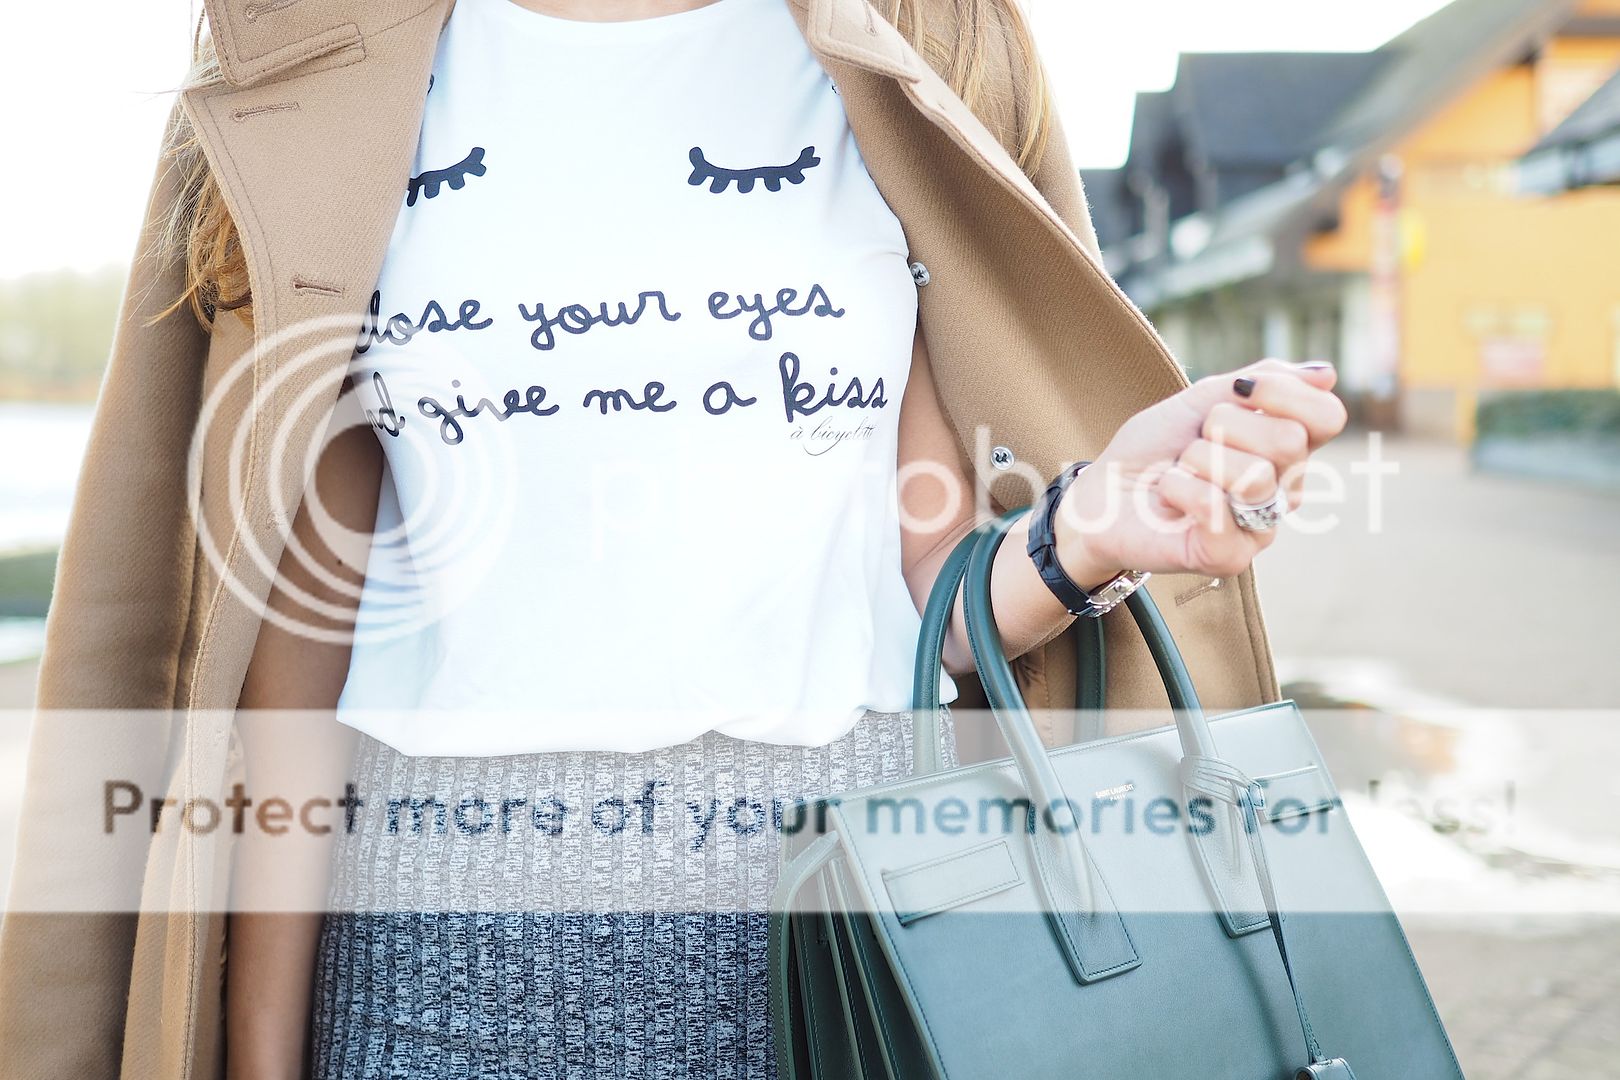  photo close your eyes and give me a kiss a bicyclette t-shirt bartabac fashion blogger.jpg